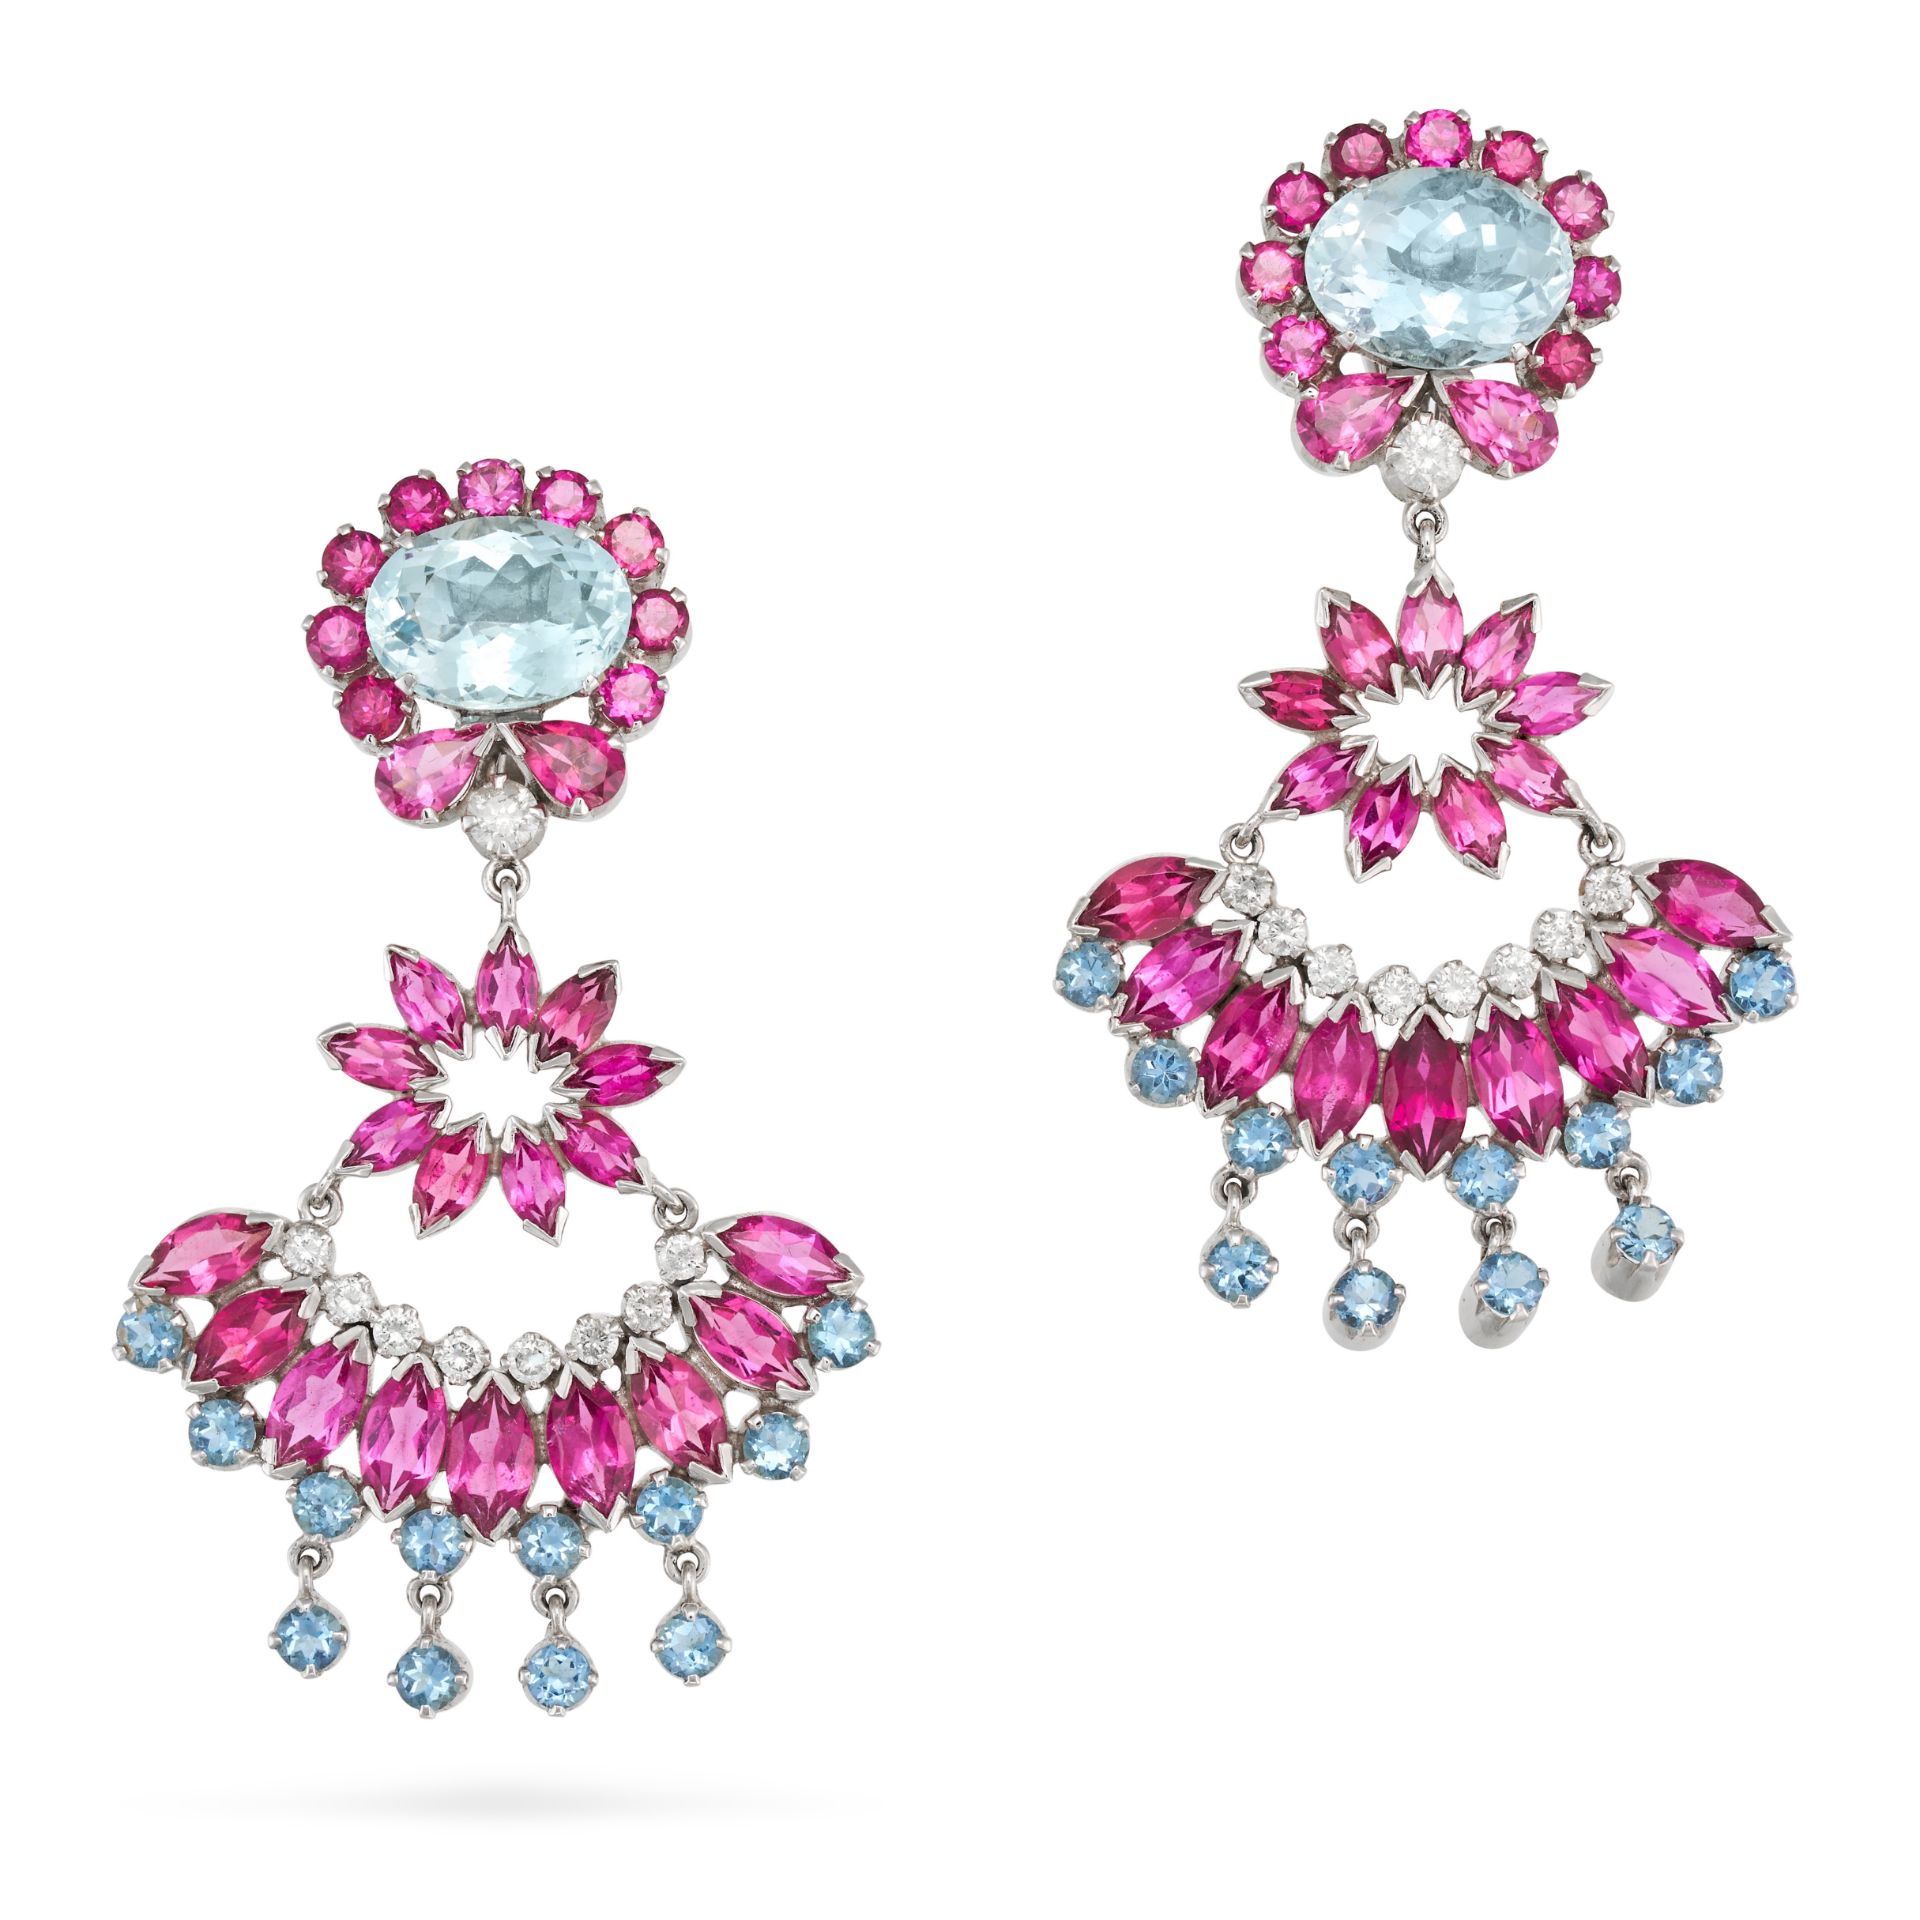 A PAIR OF AQUAMARINE, PINK TOURMALINE AND DIAMOND DROP CLIP EARRINGS each set with an oval cut aq...